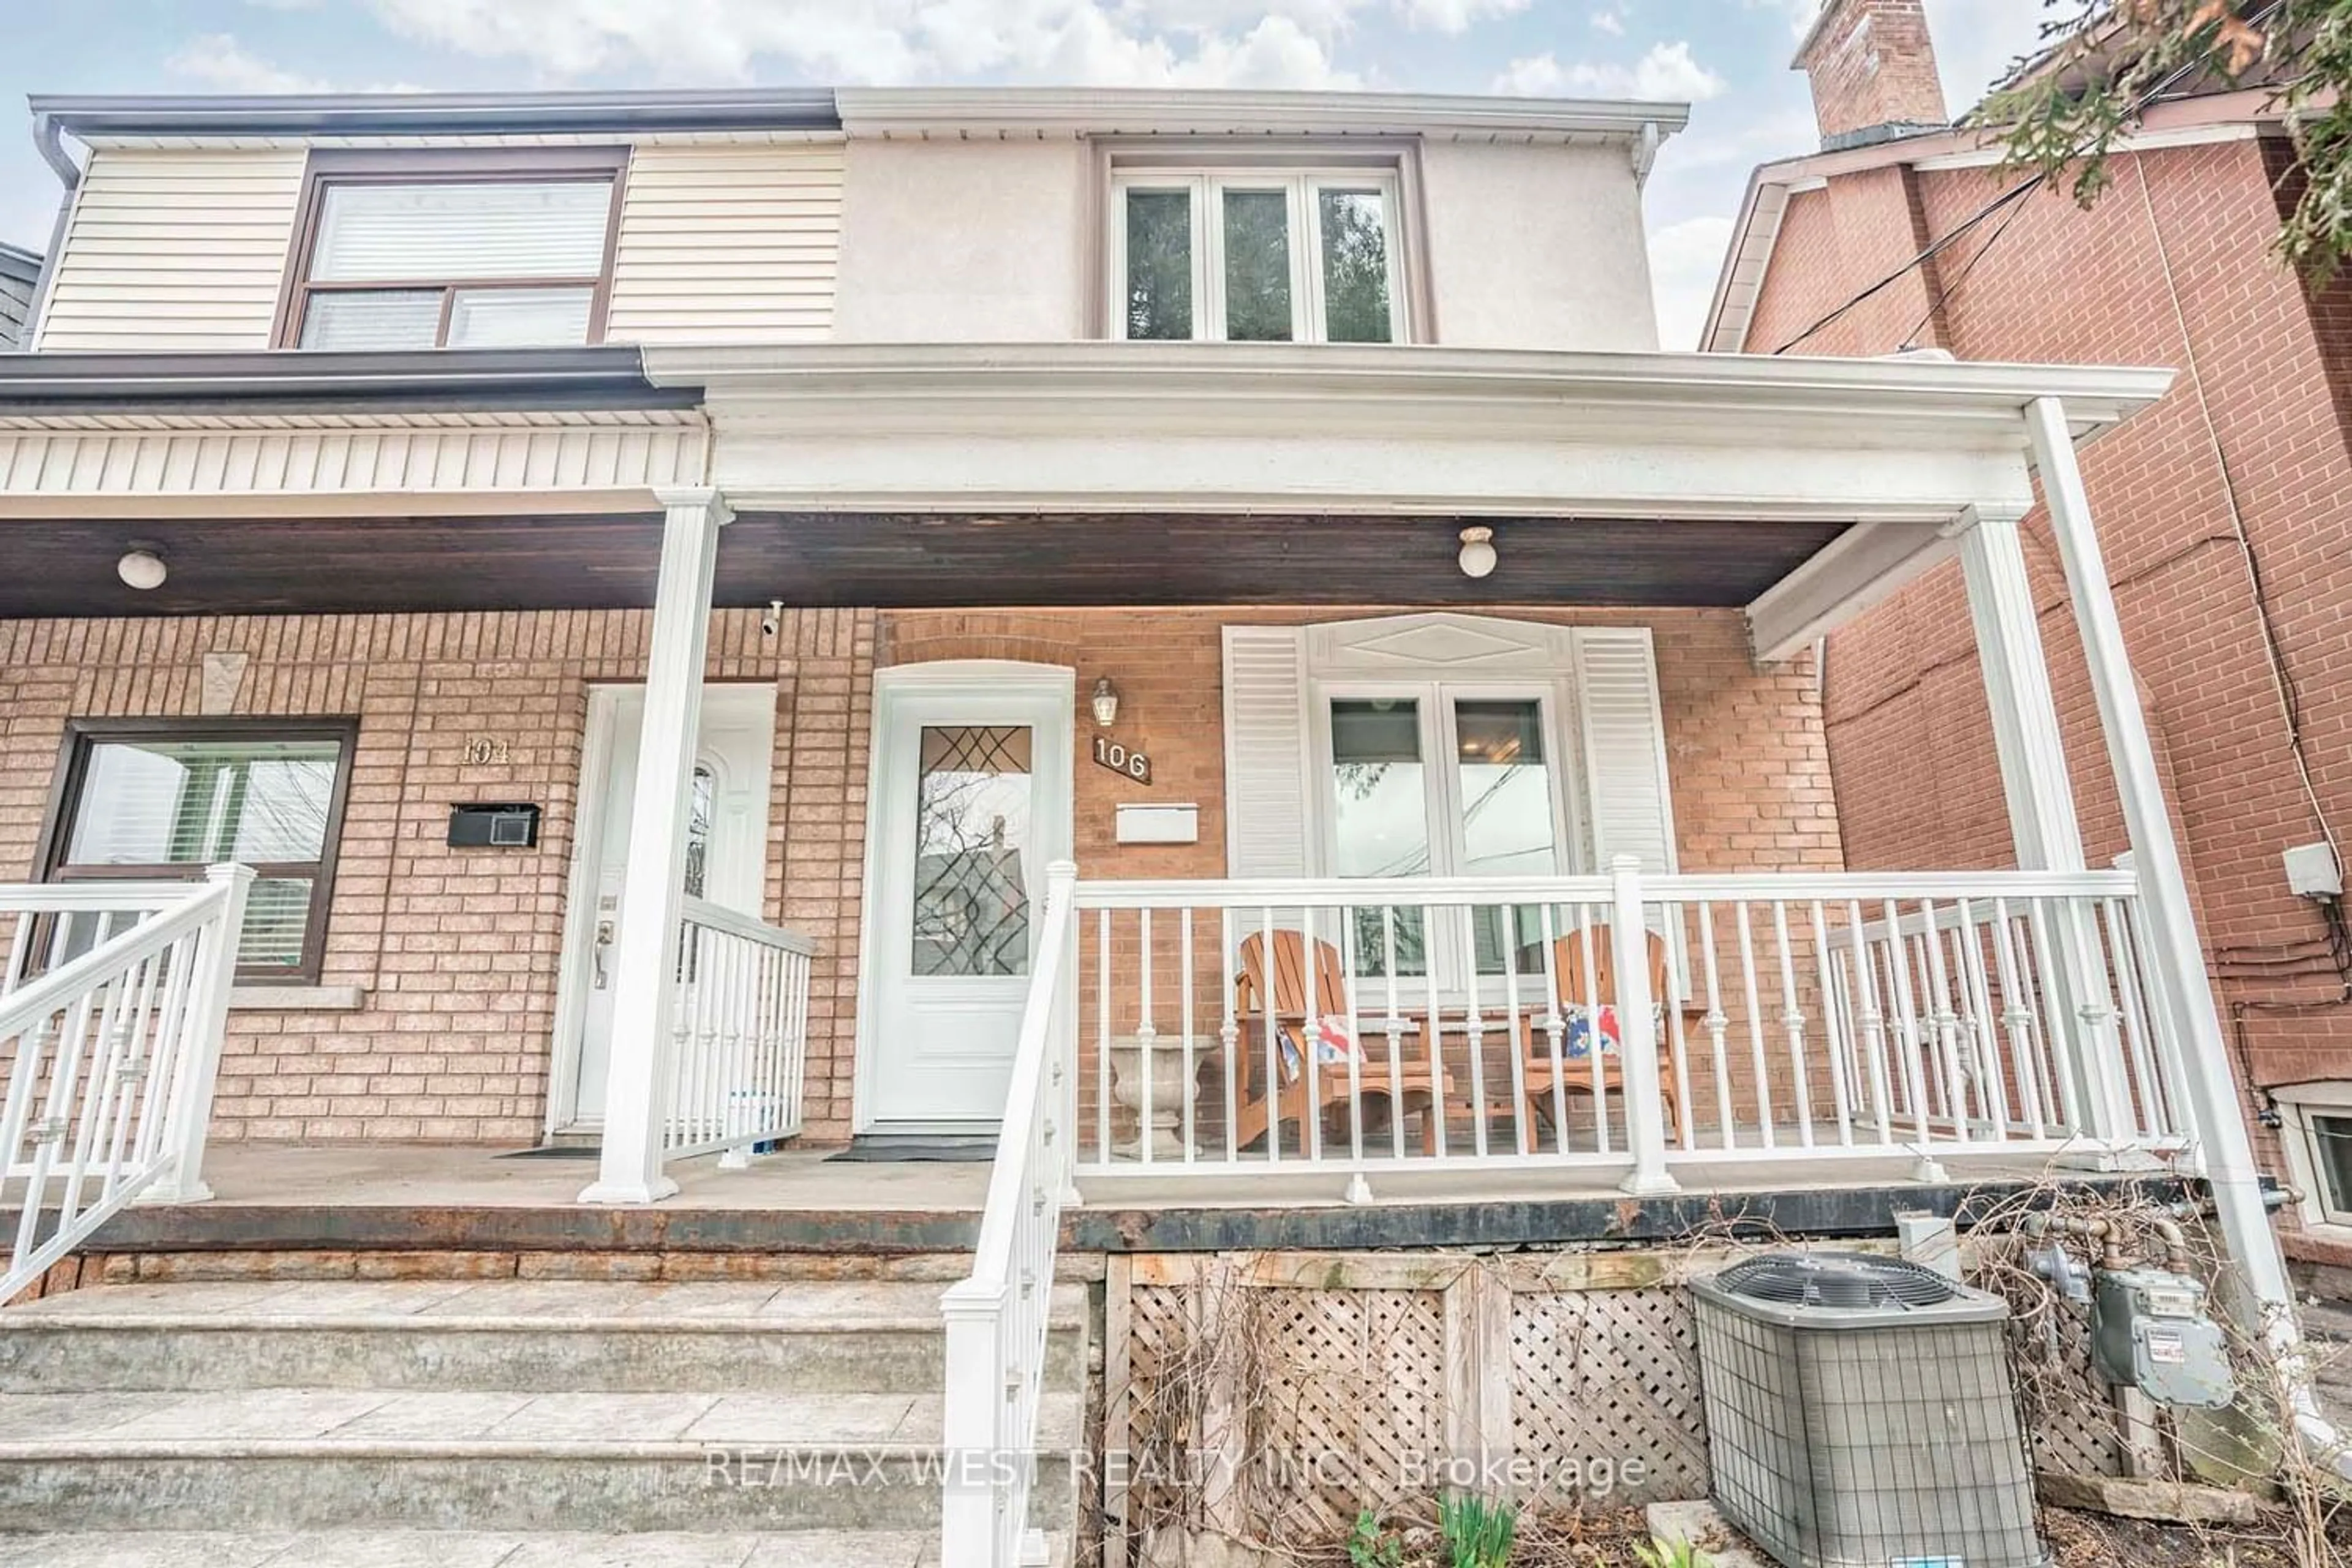 Home with brick exterior material for 106 Sellers Ave, Toronto Ontario M6E 3T6